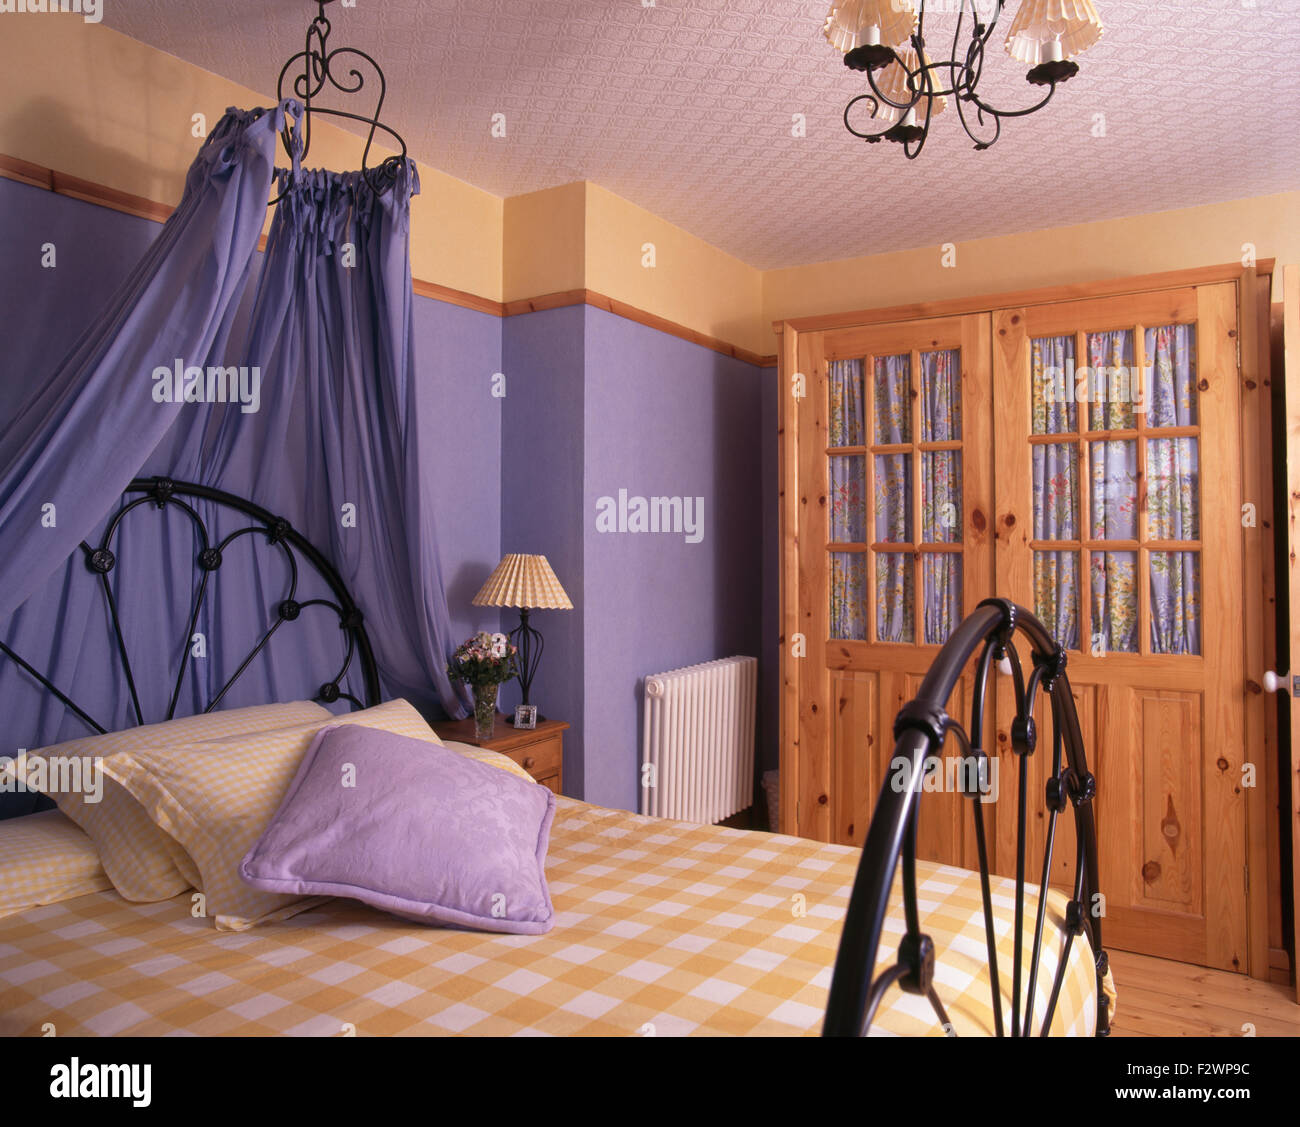 Coronet with blue drapes above wrought iron bed in nineties bedroom with pine wardrobe Stock Photo